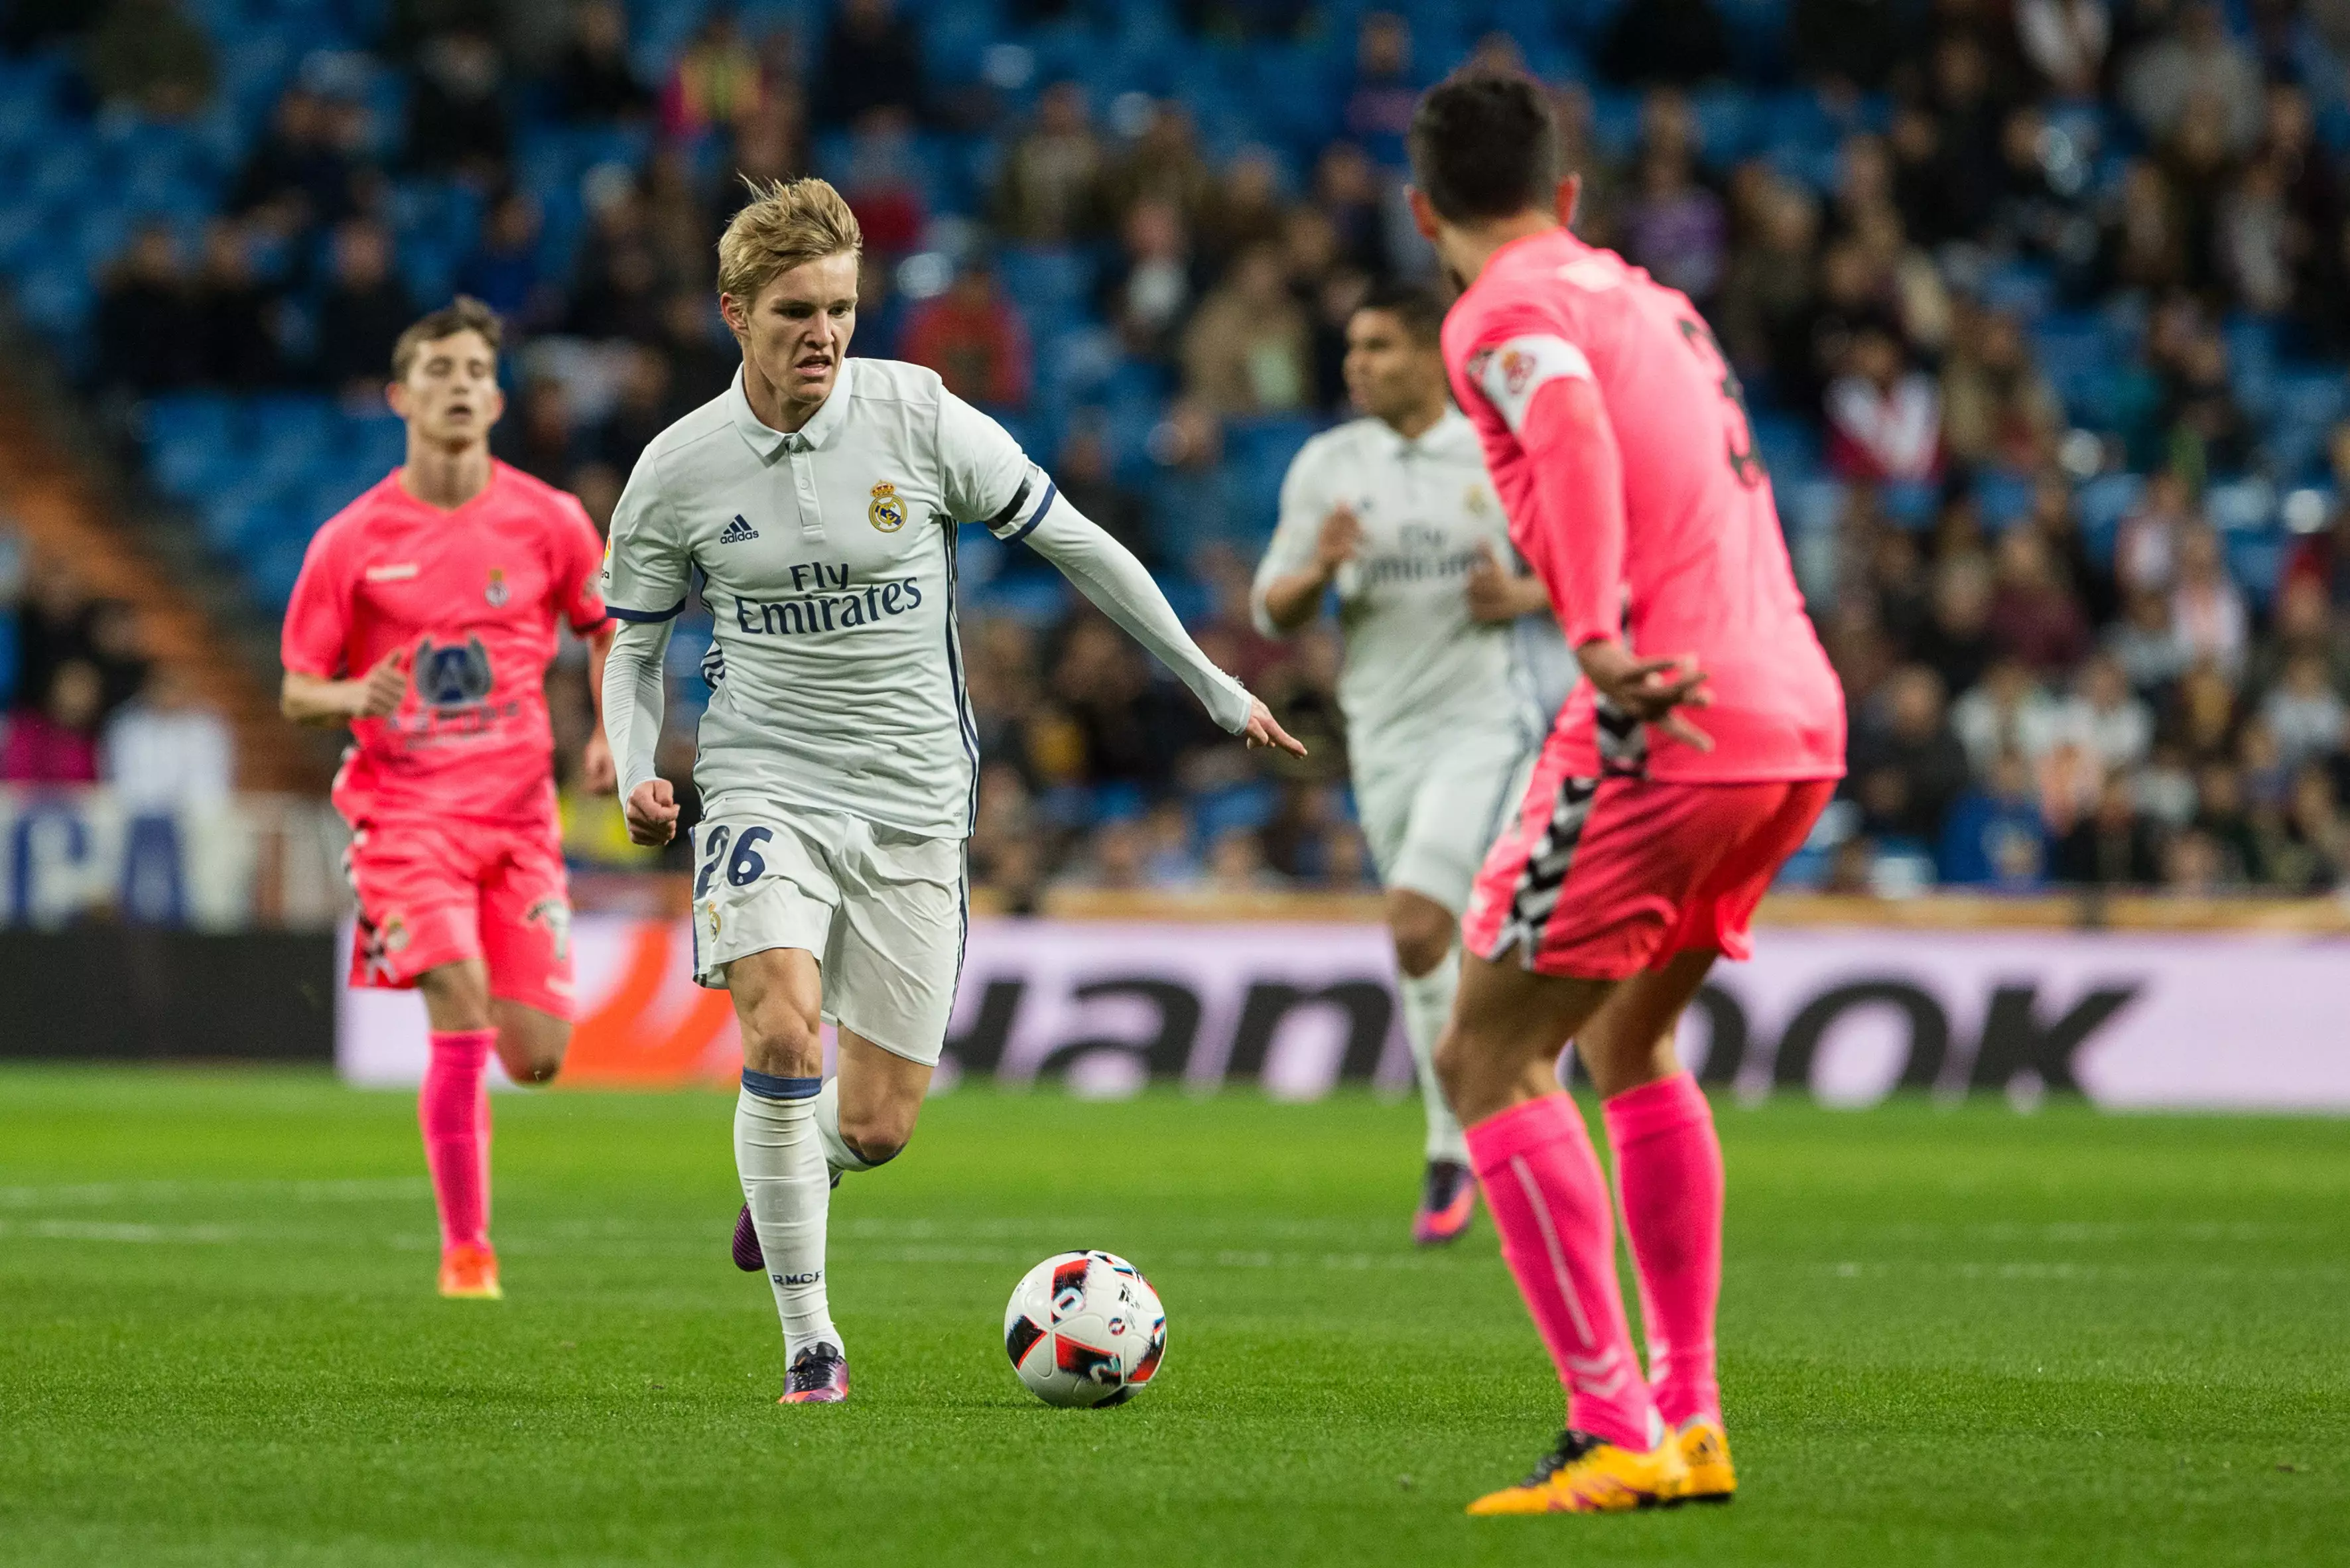 Odegaard in action for Real Madrid. Image: PA